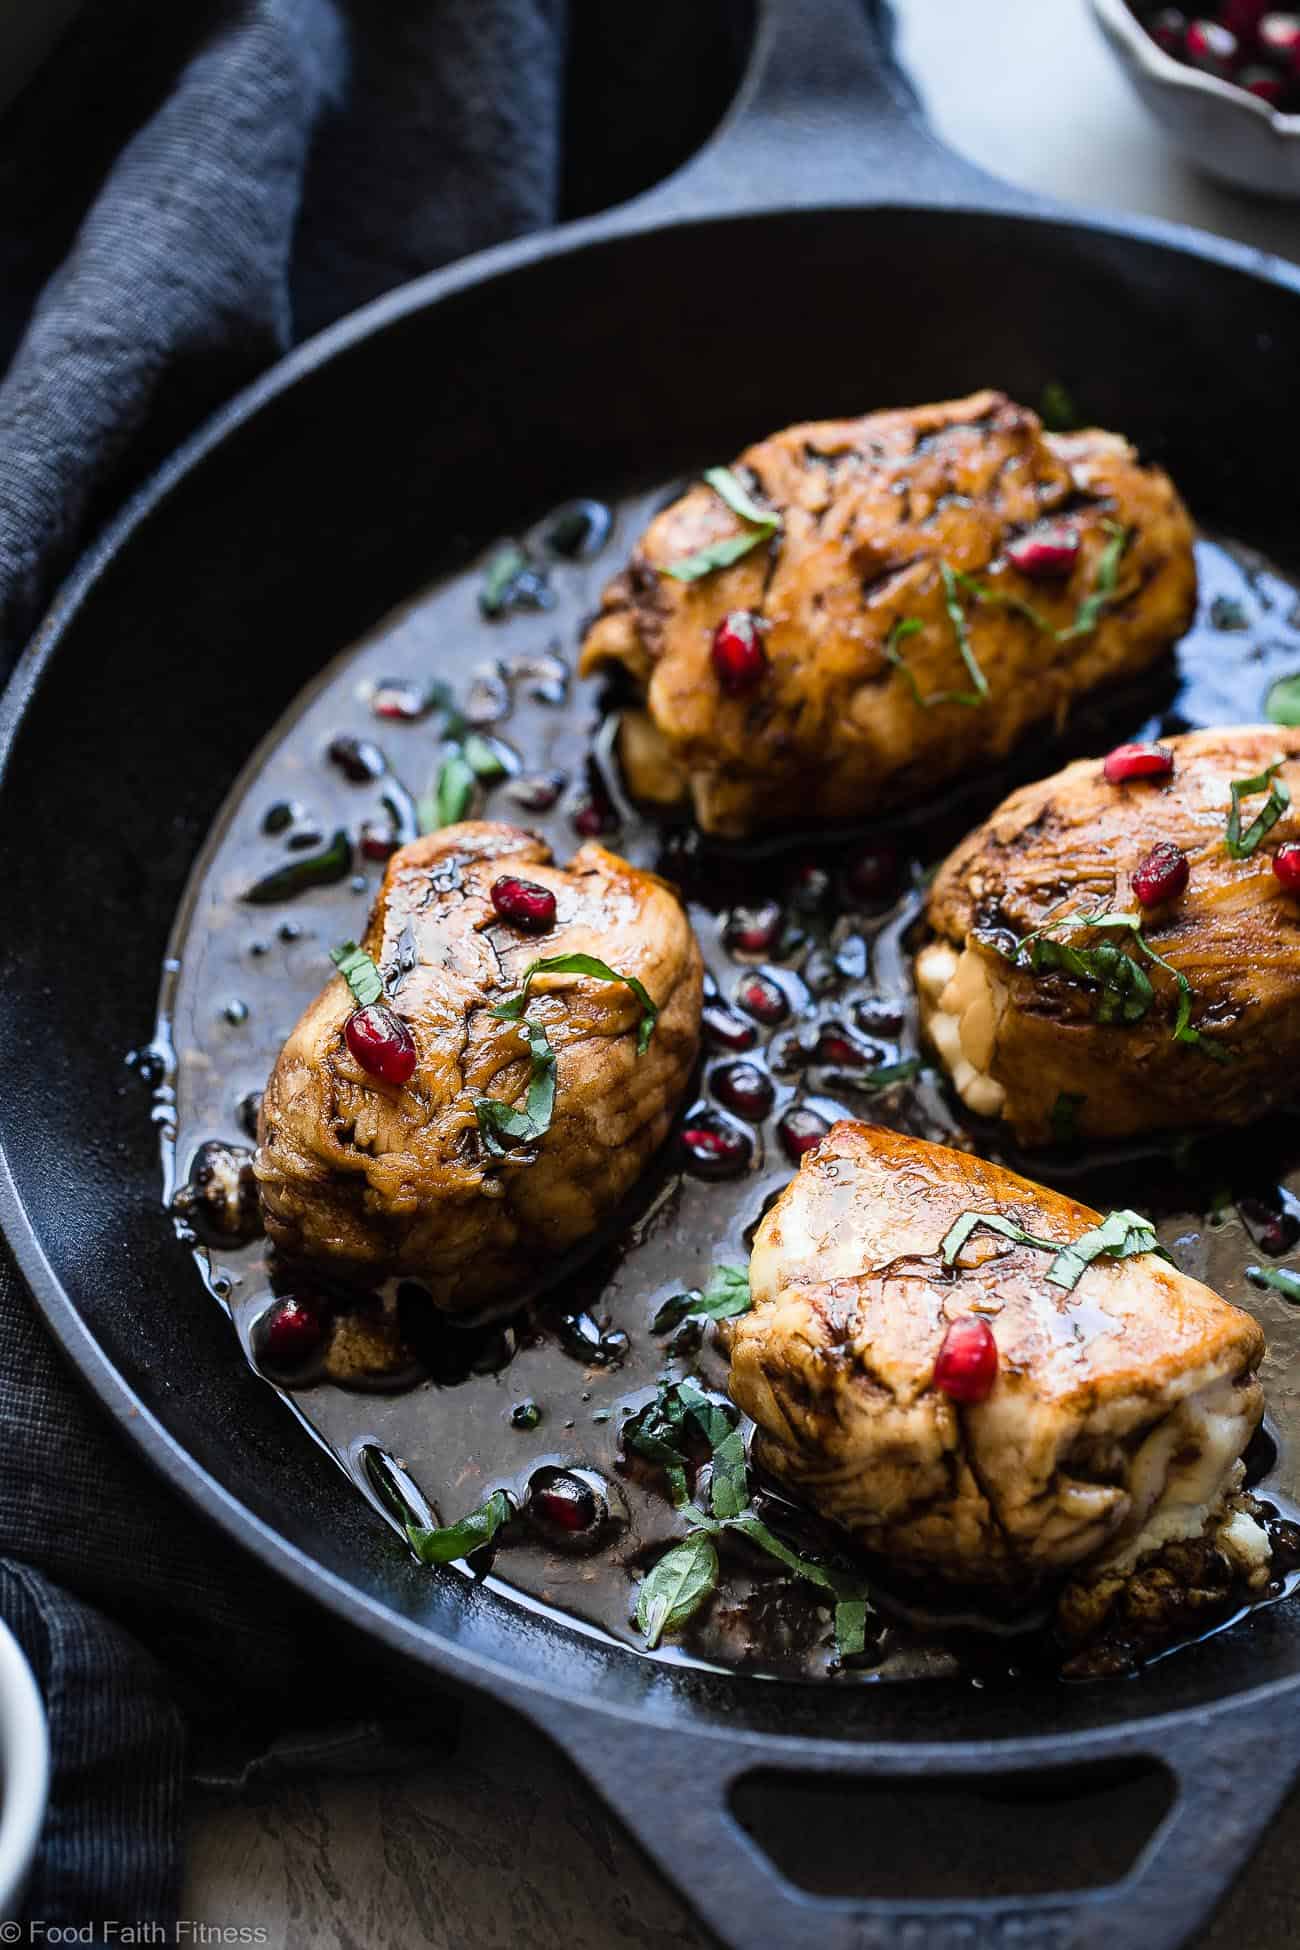 Baked Balsamic Goat Cheese Stuffed Pomegranate Chicken - This balsamic chicken breast is a healthy and gluten free dinner, loaded with superfoods! Both picky husbands and kids love this dinner and it feels like a fancy restaurant but is quick and easy enough for weeknights! | Foodfaithfitness.com | @FoodFaithFit